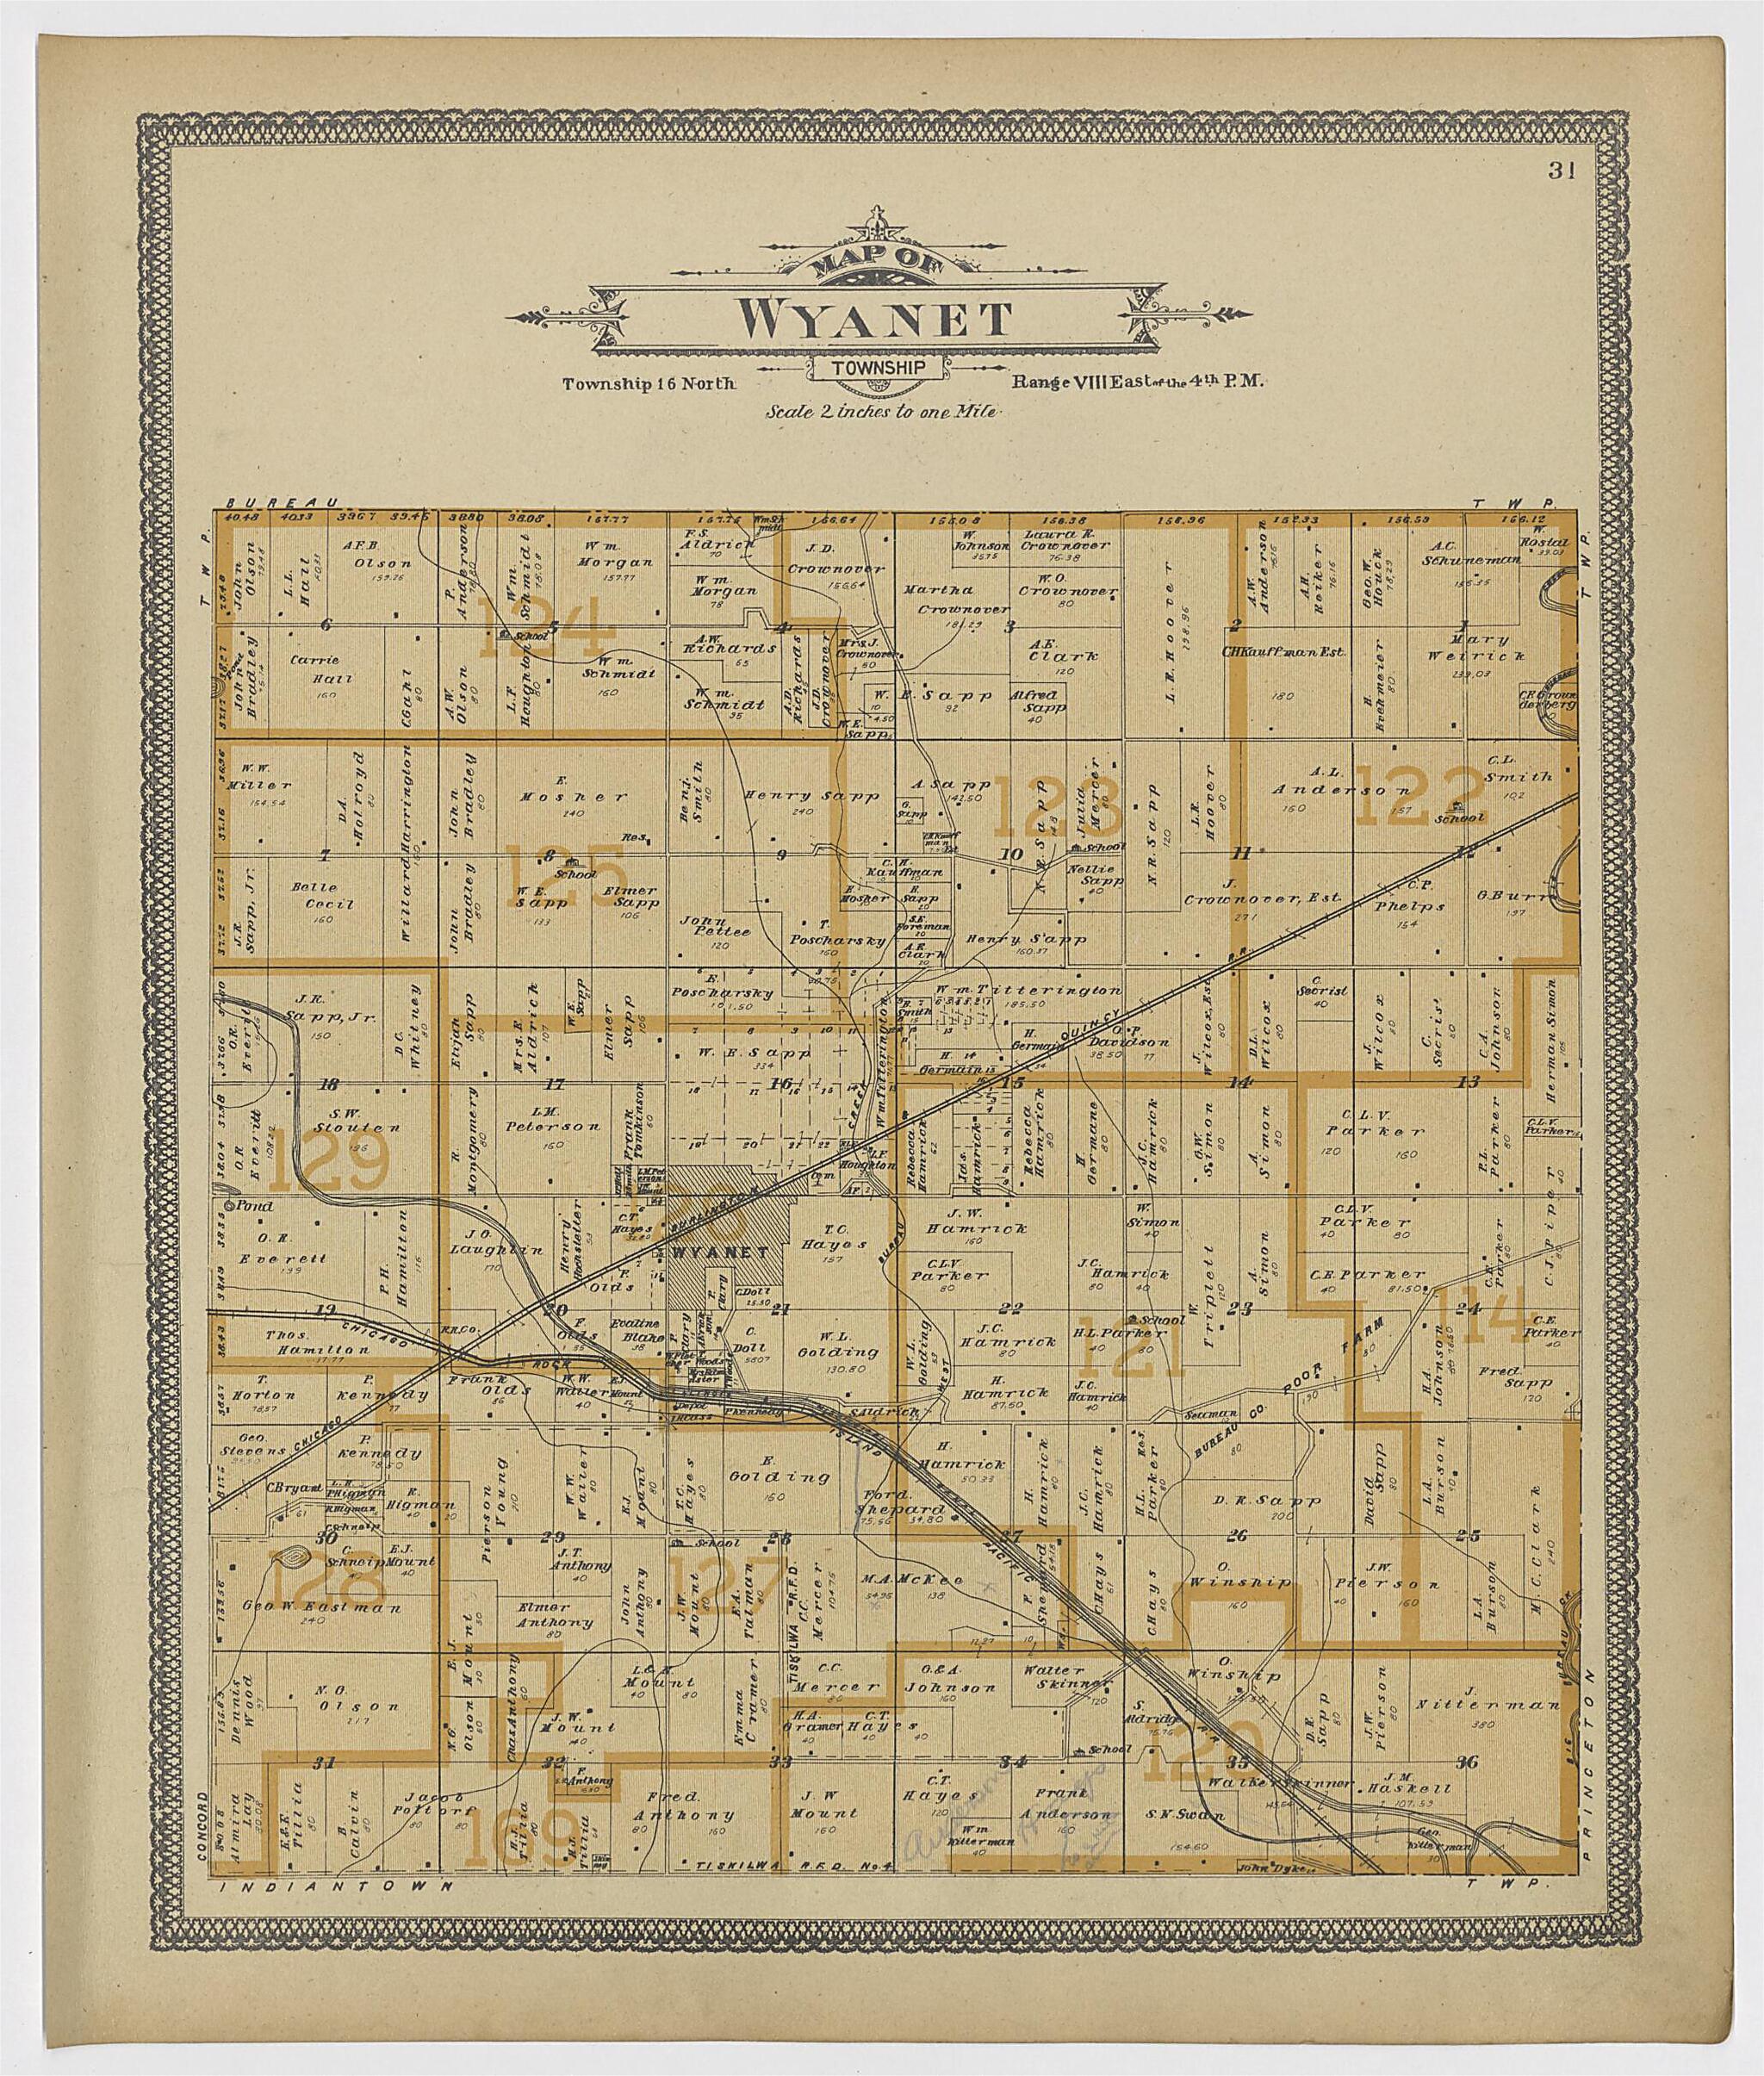 This old map of Image 17 of 20th Century Atlas of Bureau County, Illinois from Atlas of Bureau County, Illinois from 1905 was created by  Middle-West Publishing Co in 1905